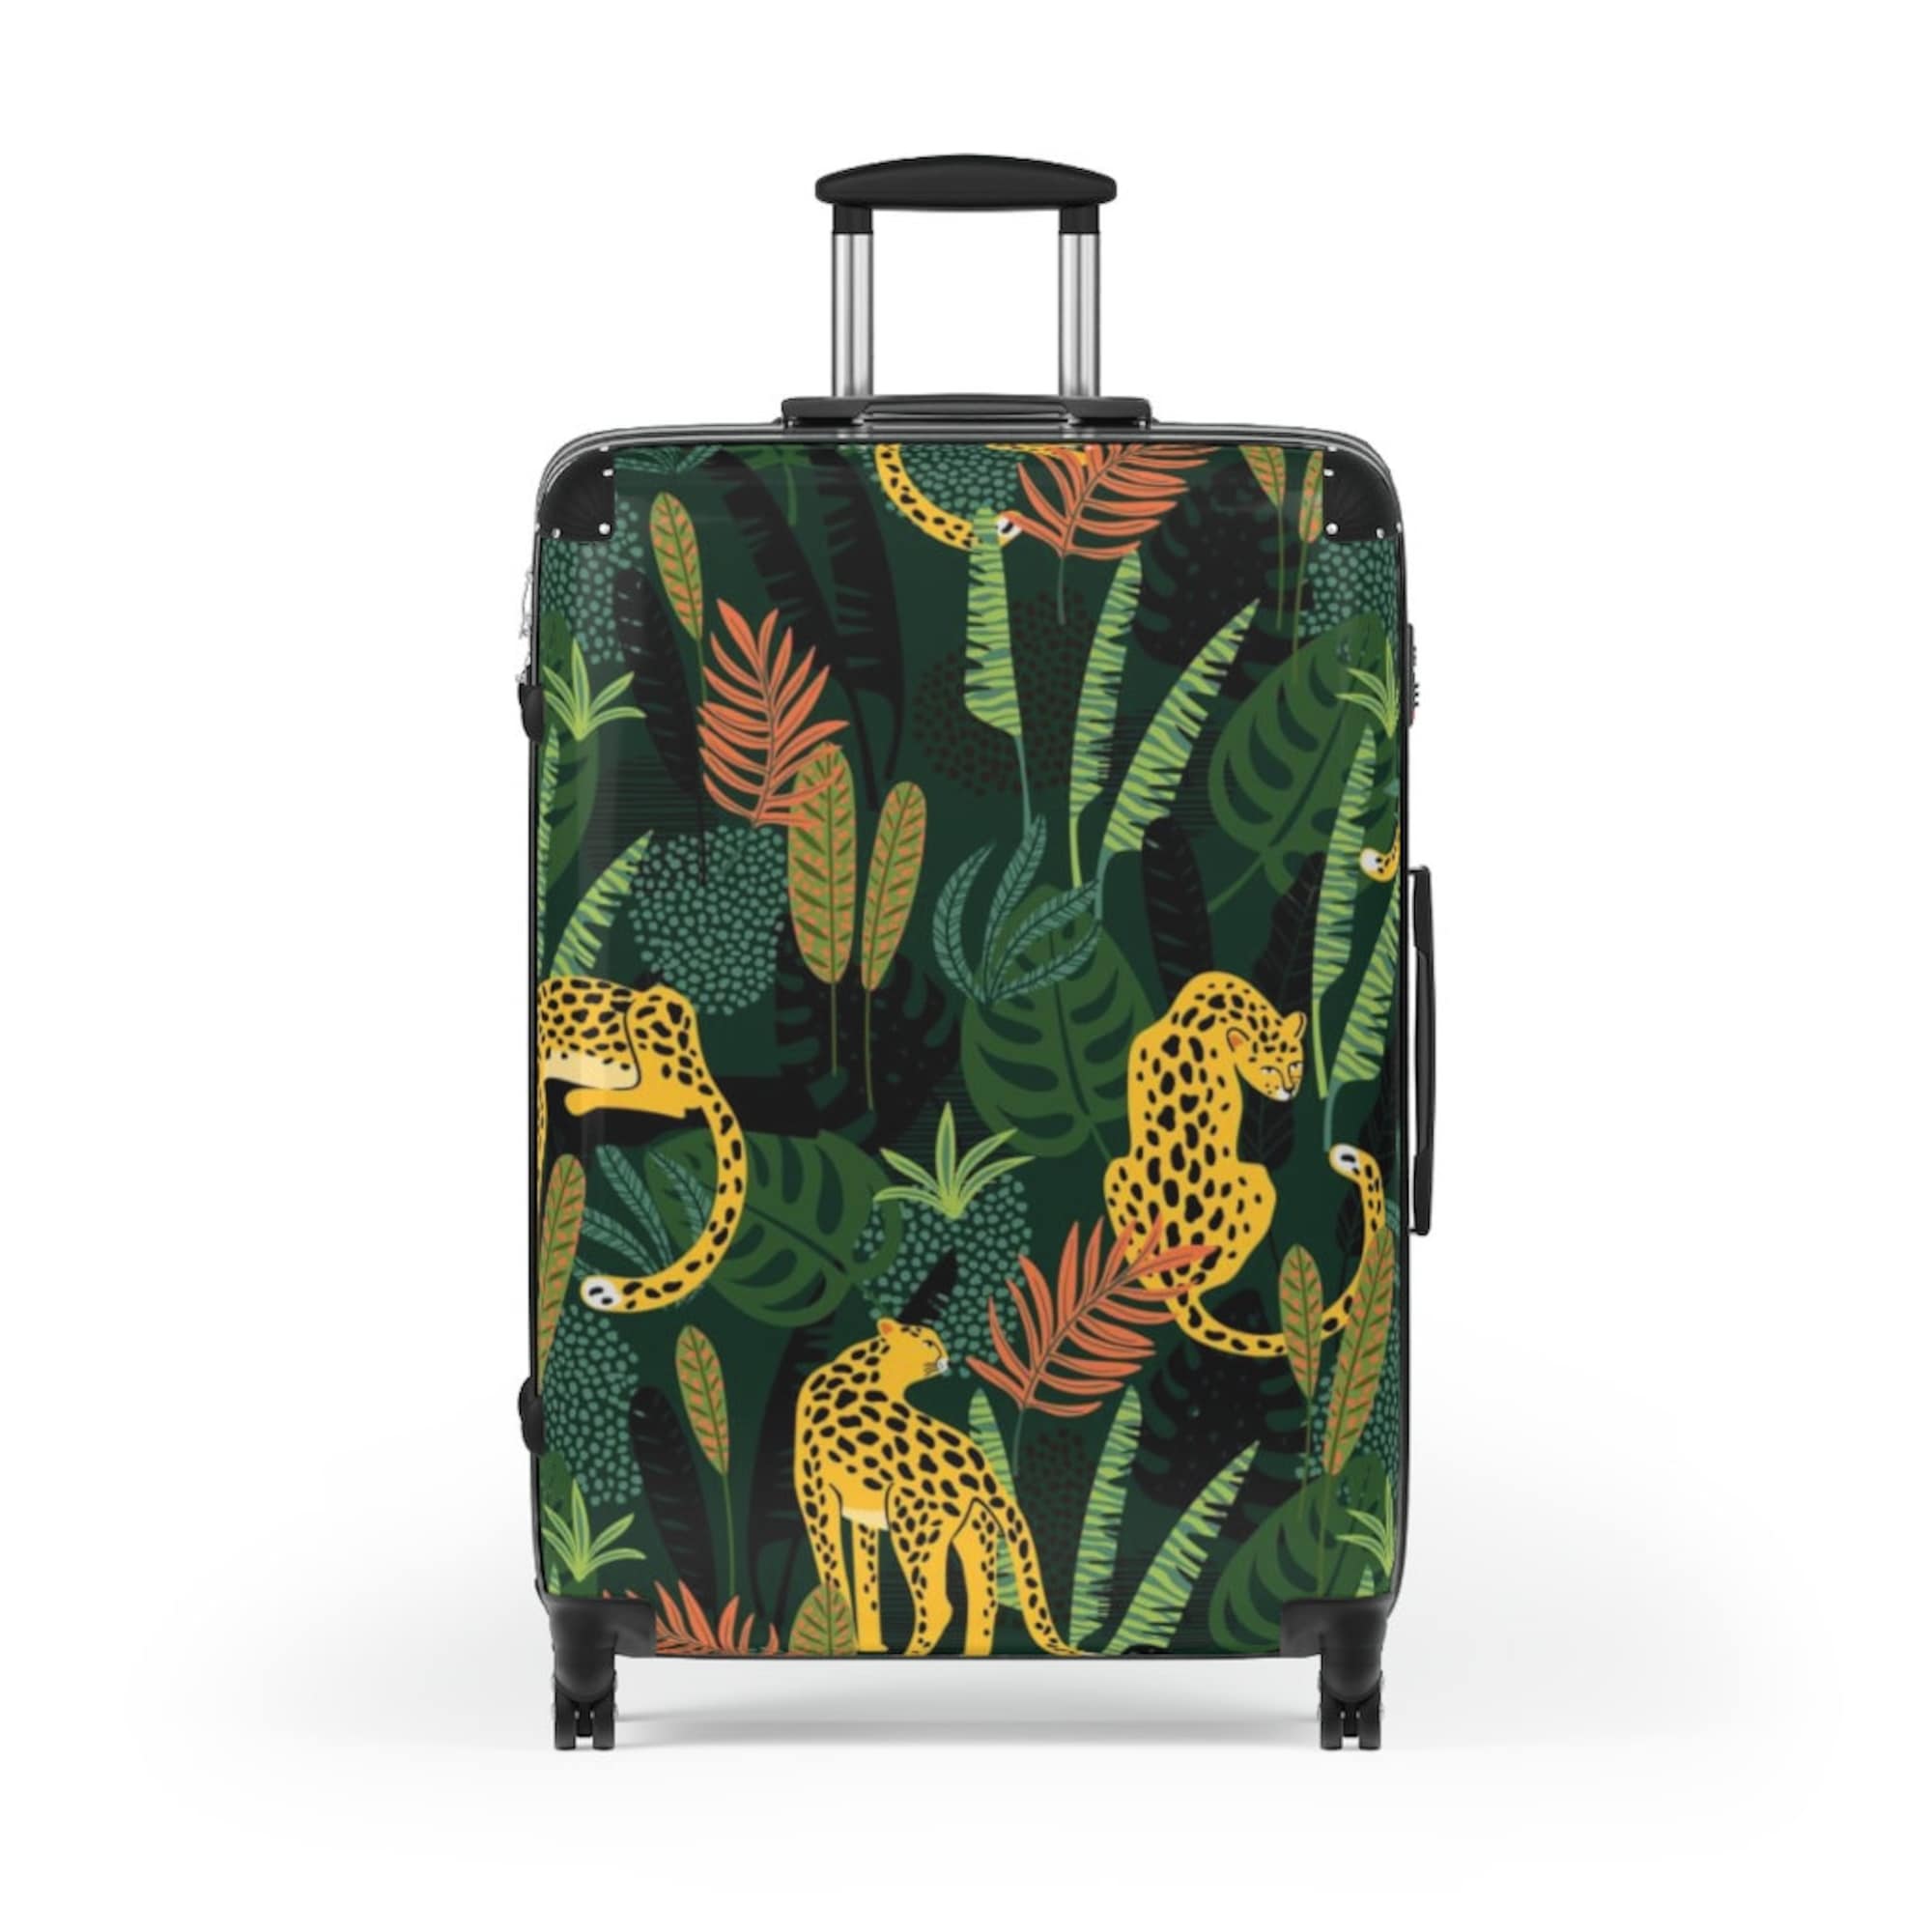 The Jungle Fever Suitcase